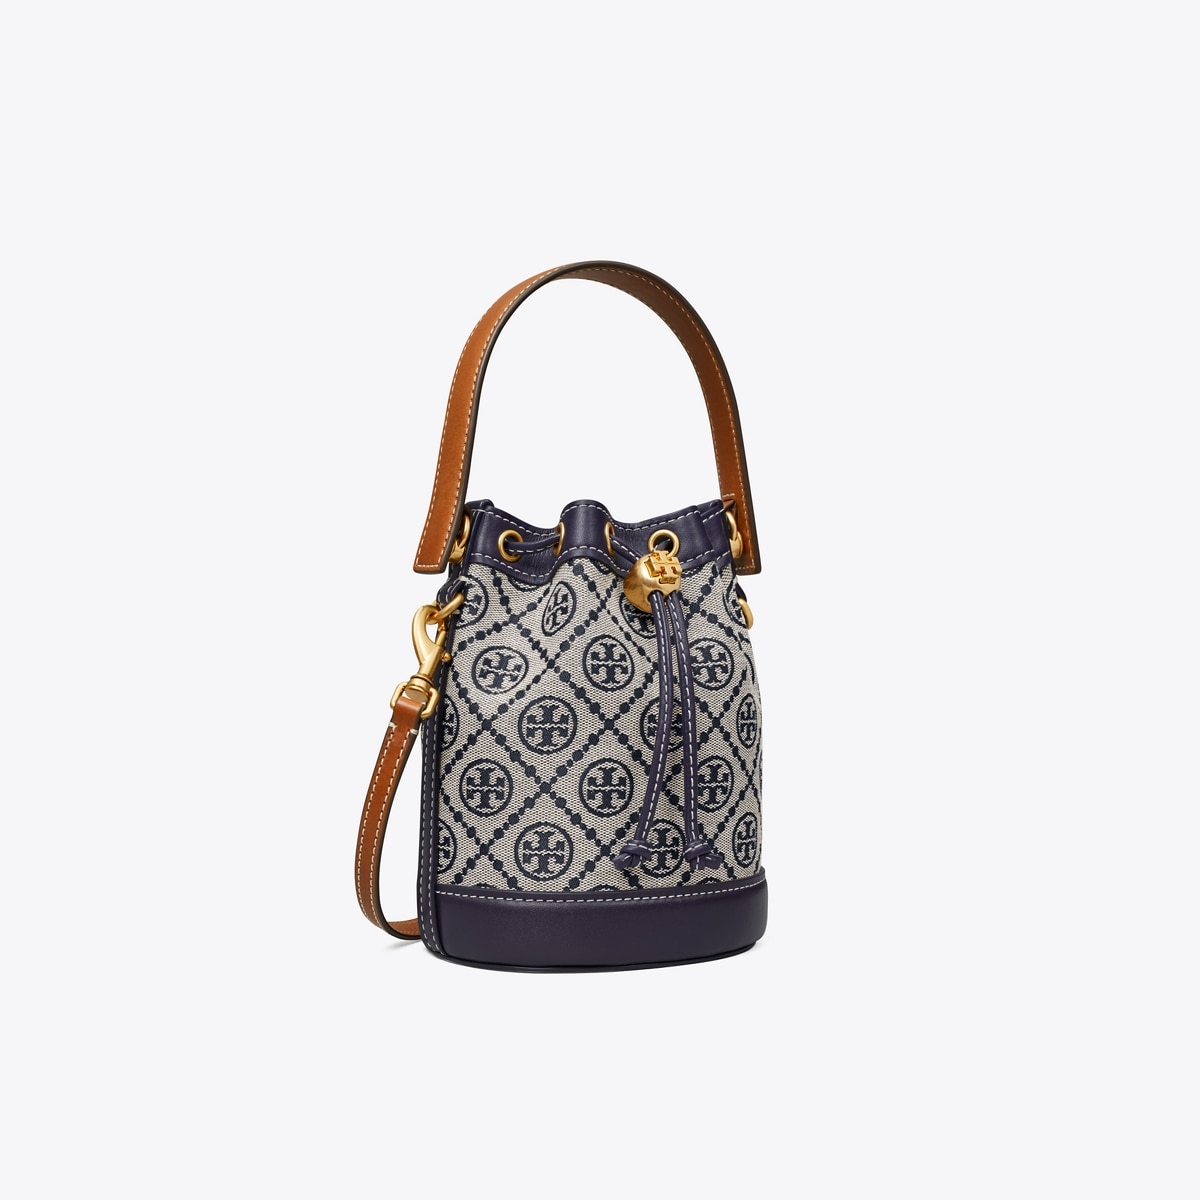 Tory Burch T Monogram Bucket Bag Navy Army | Literacy Ontario Central South